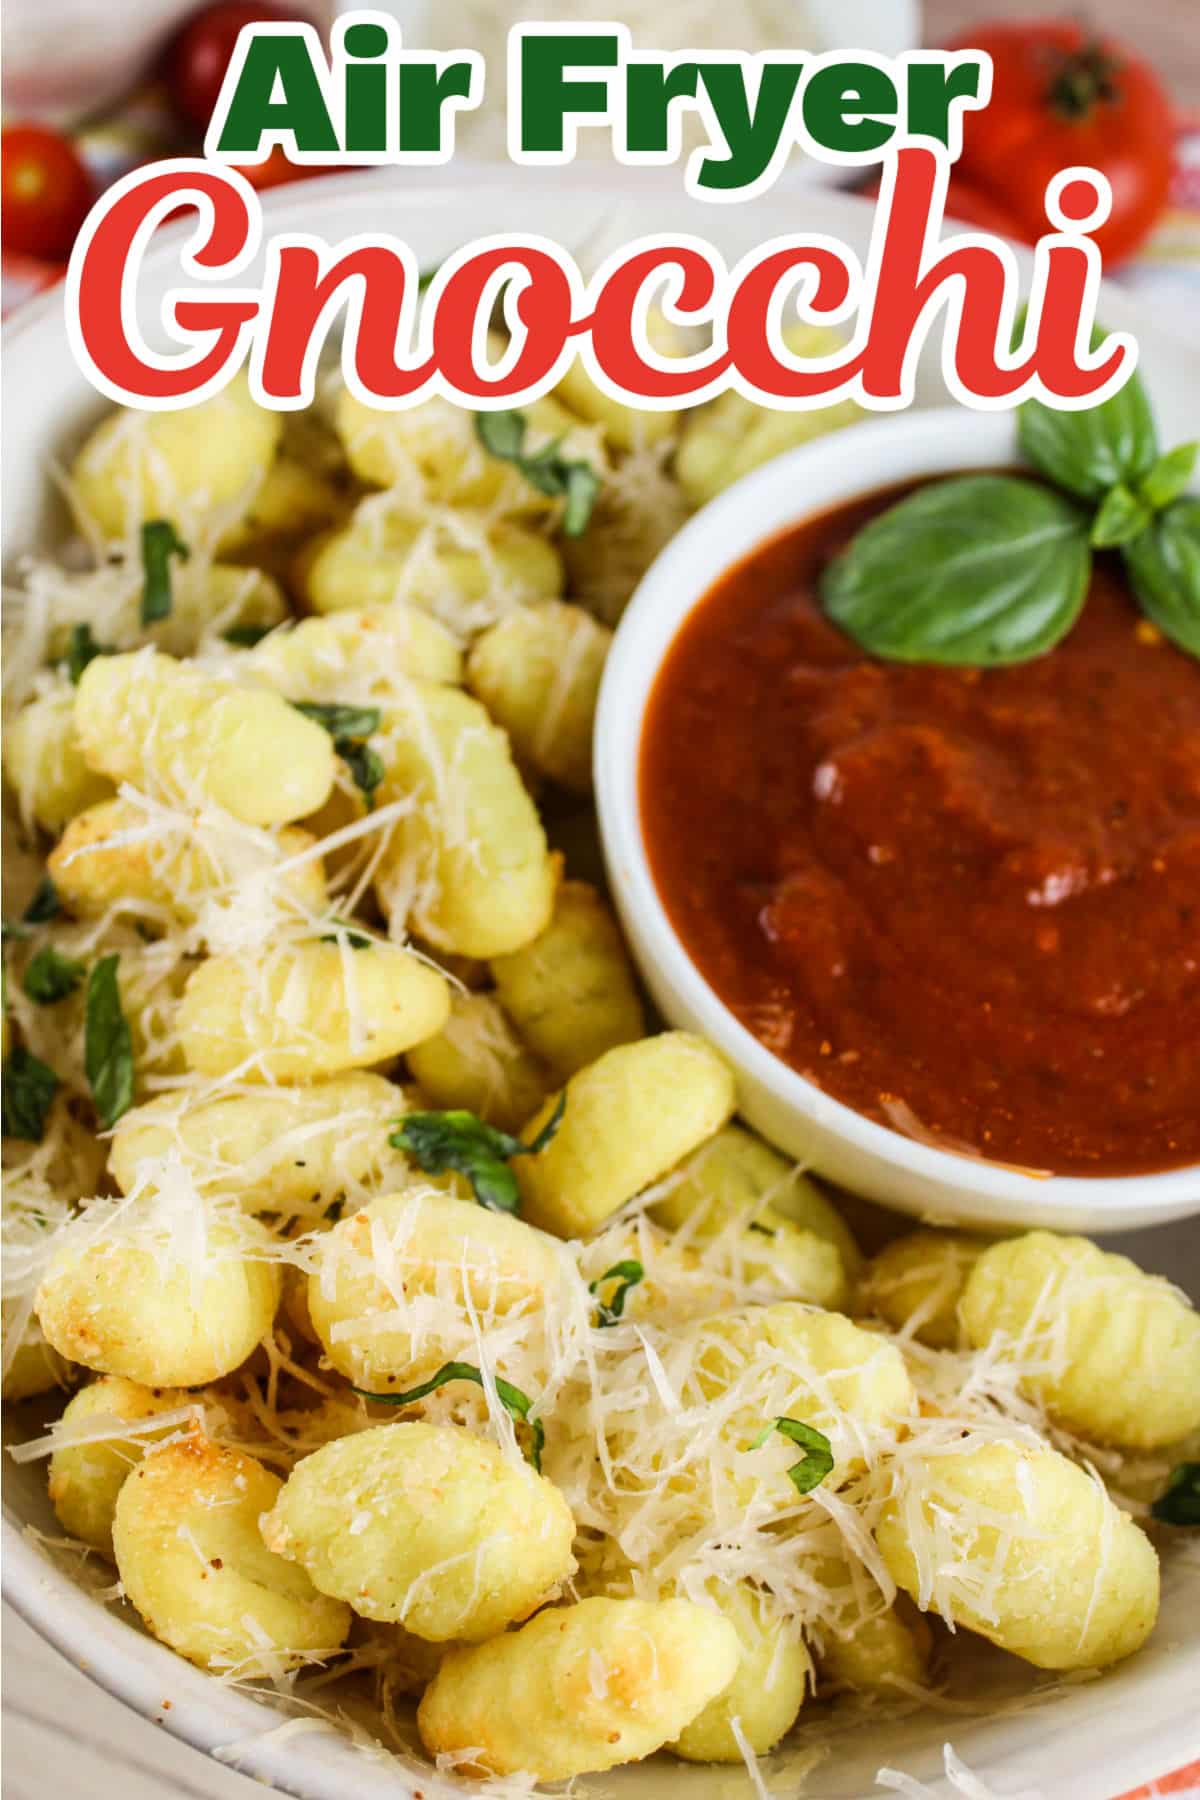 Air Fryer Gnocchi is such a delicious surprise! You will love these little crunchy pillows of yum - especially when they're tossed in garlic and Parmesan cheese and dipped in your favorite marinara sauce.   via @foodhussy